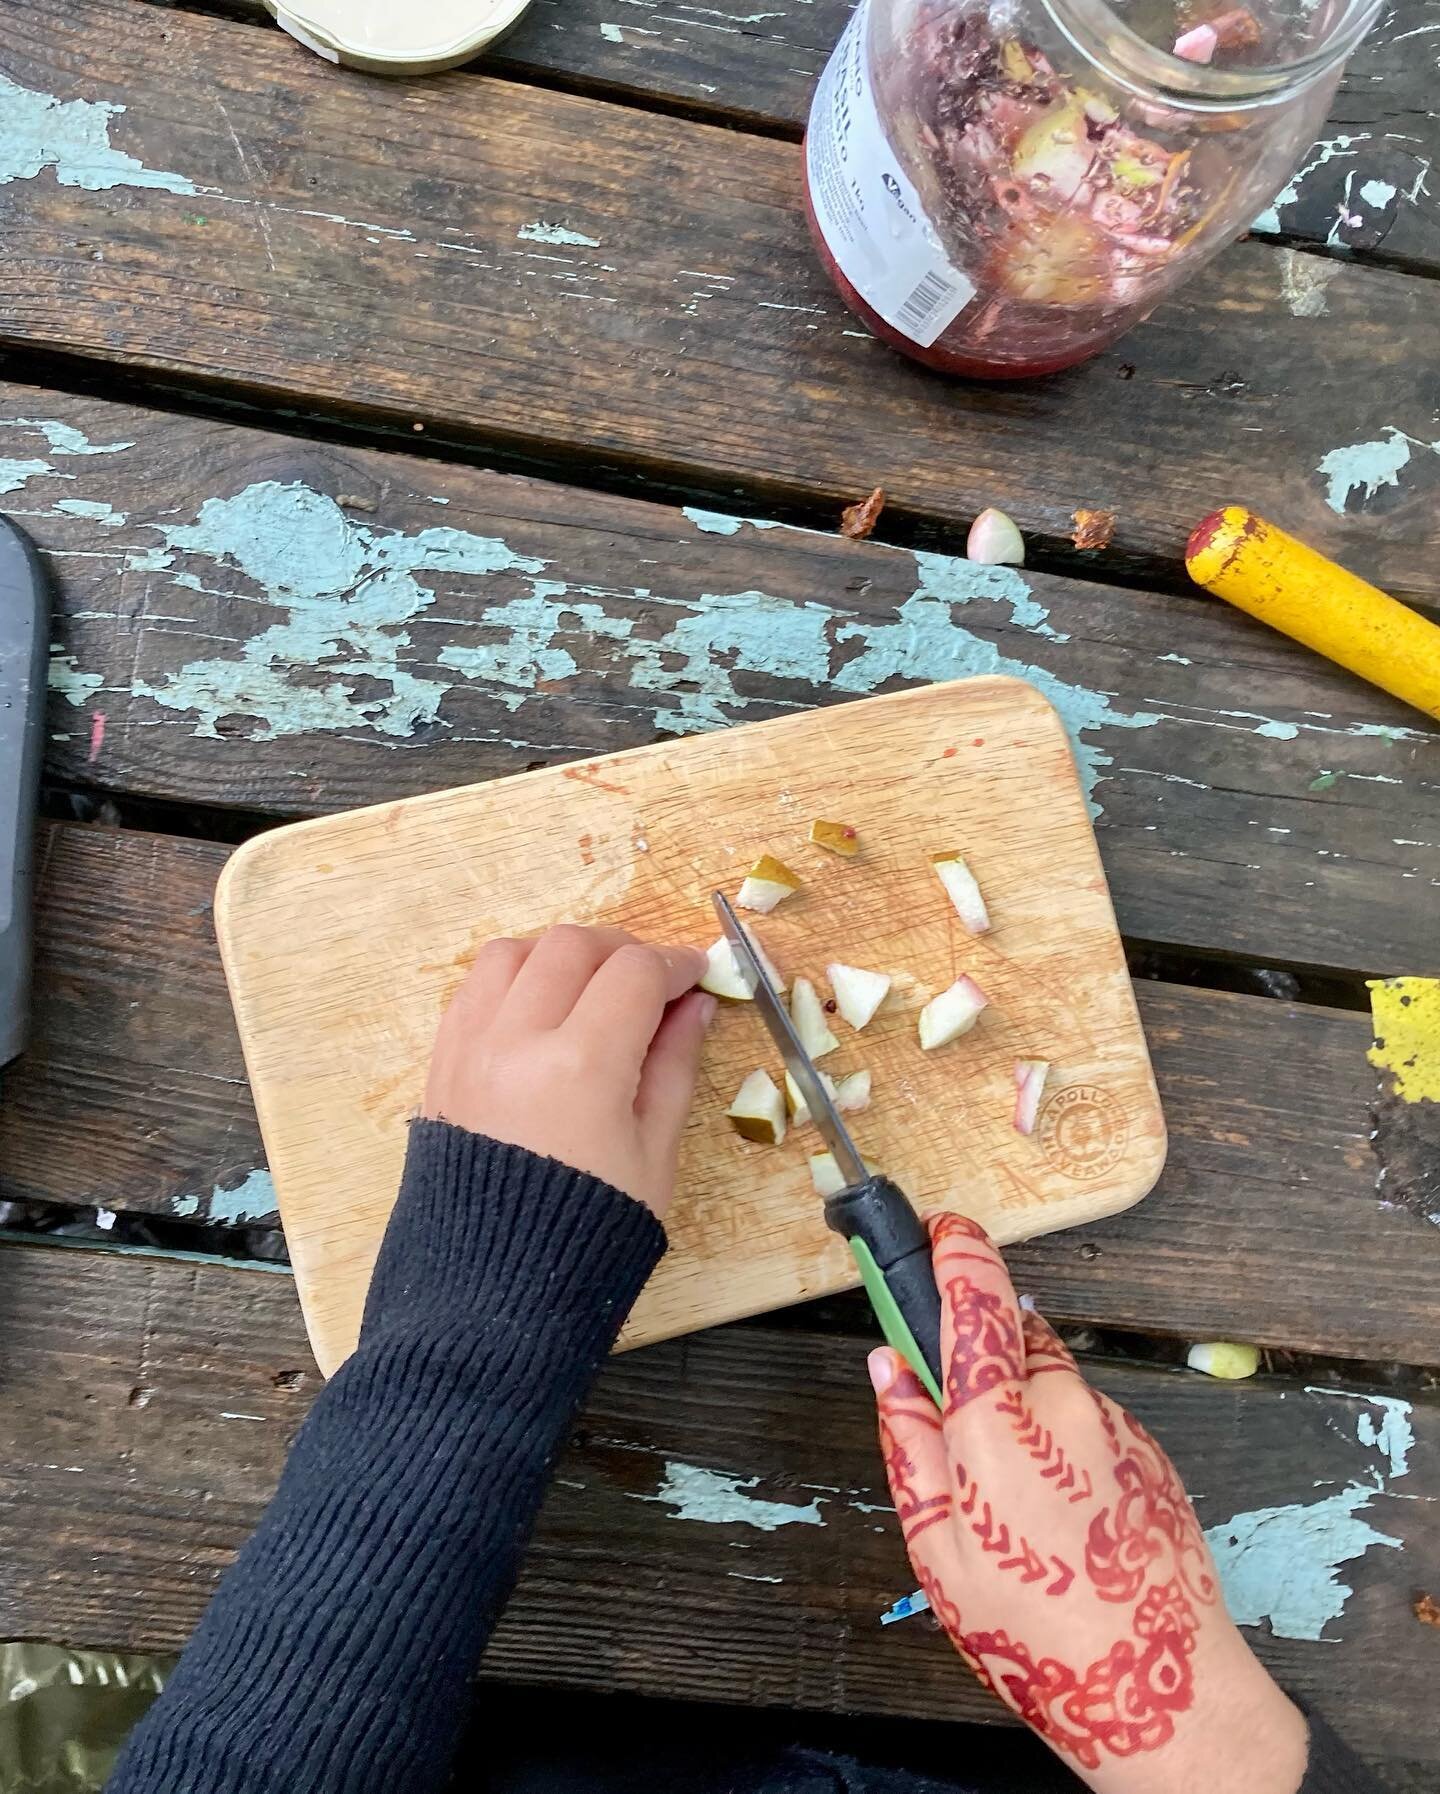 Gloriously muddy, wet, September days playing outside 💜💚 making potions, leaf printing, digging holes and filling buckets w mud! 

We are delivering free play, forest school inspired sessions to our local primary school this month. Feeling grateful